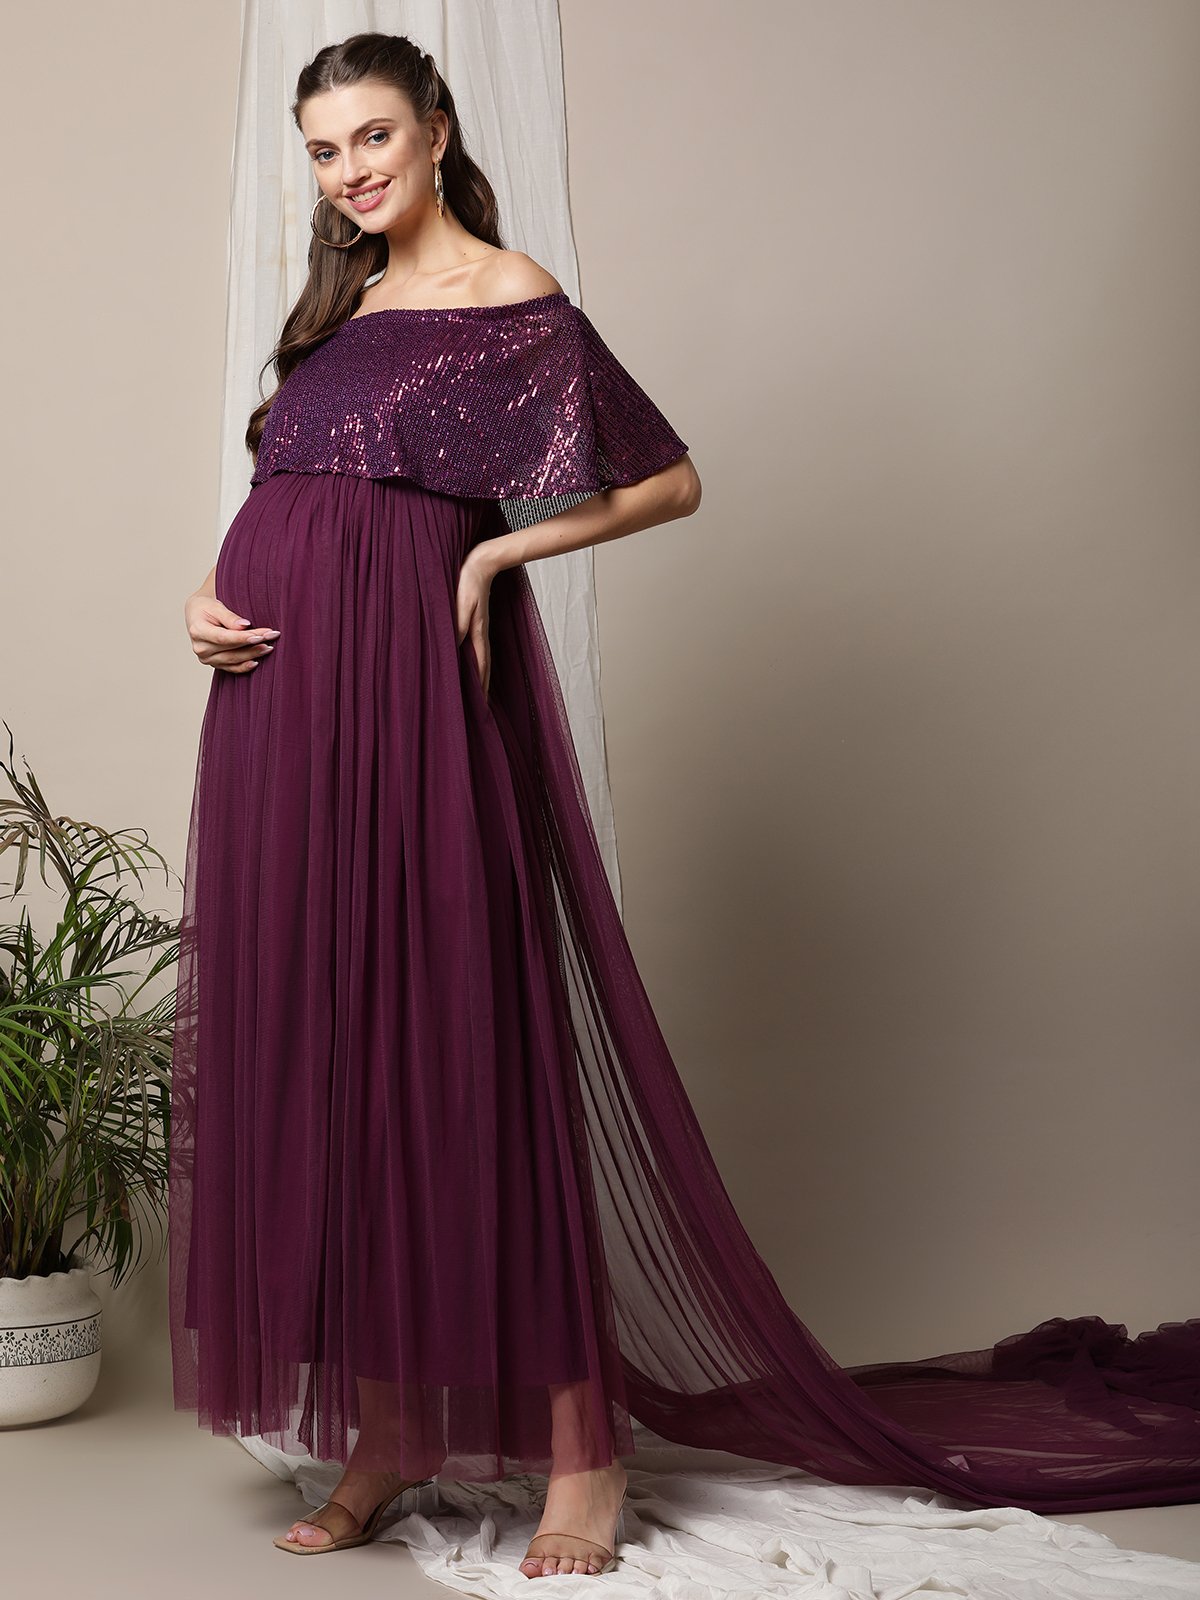 Sequined Maternity Photoshoot Gown - Purple